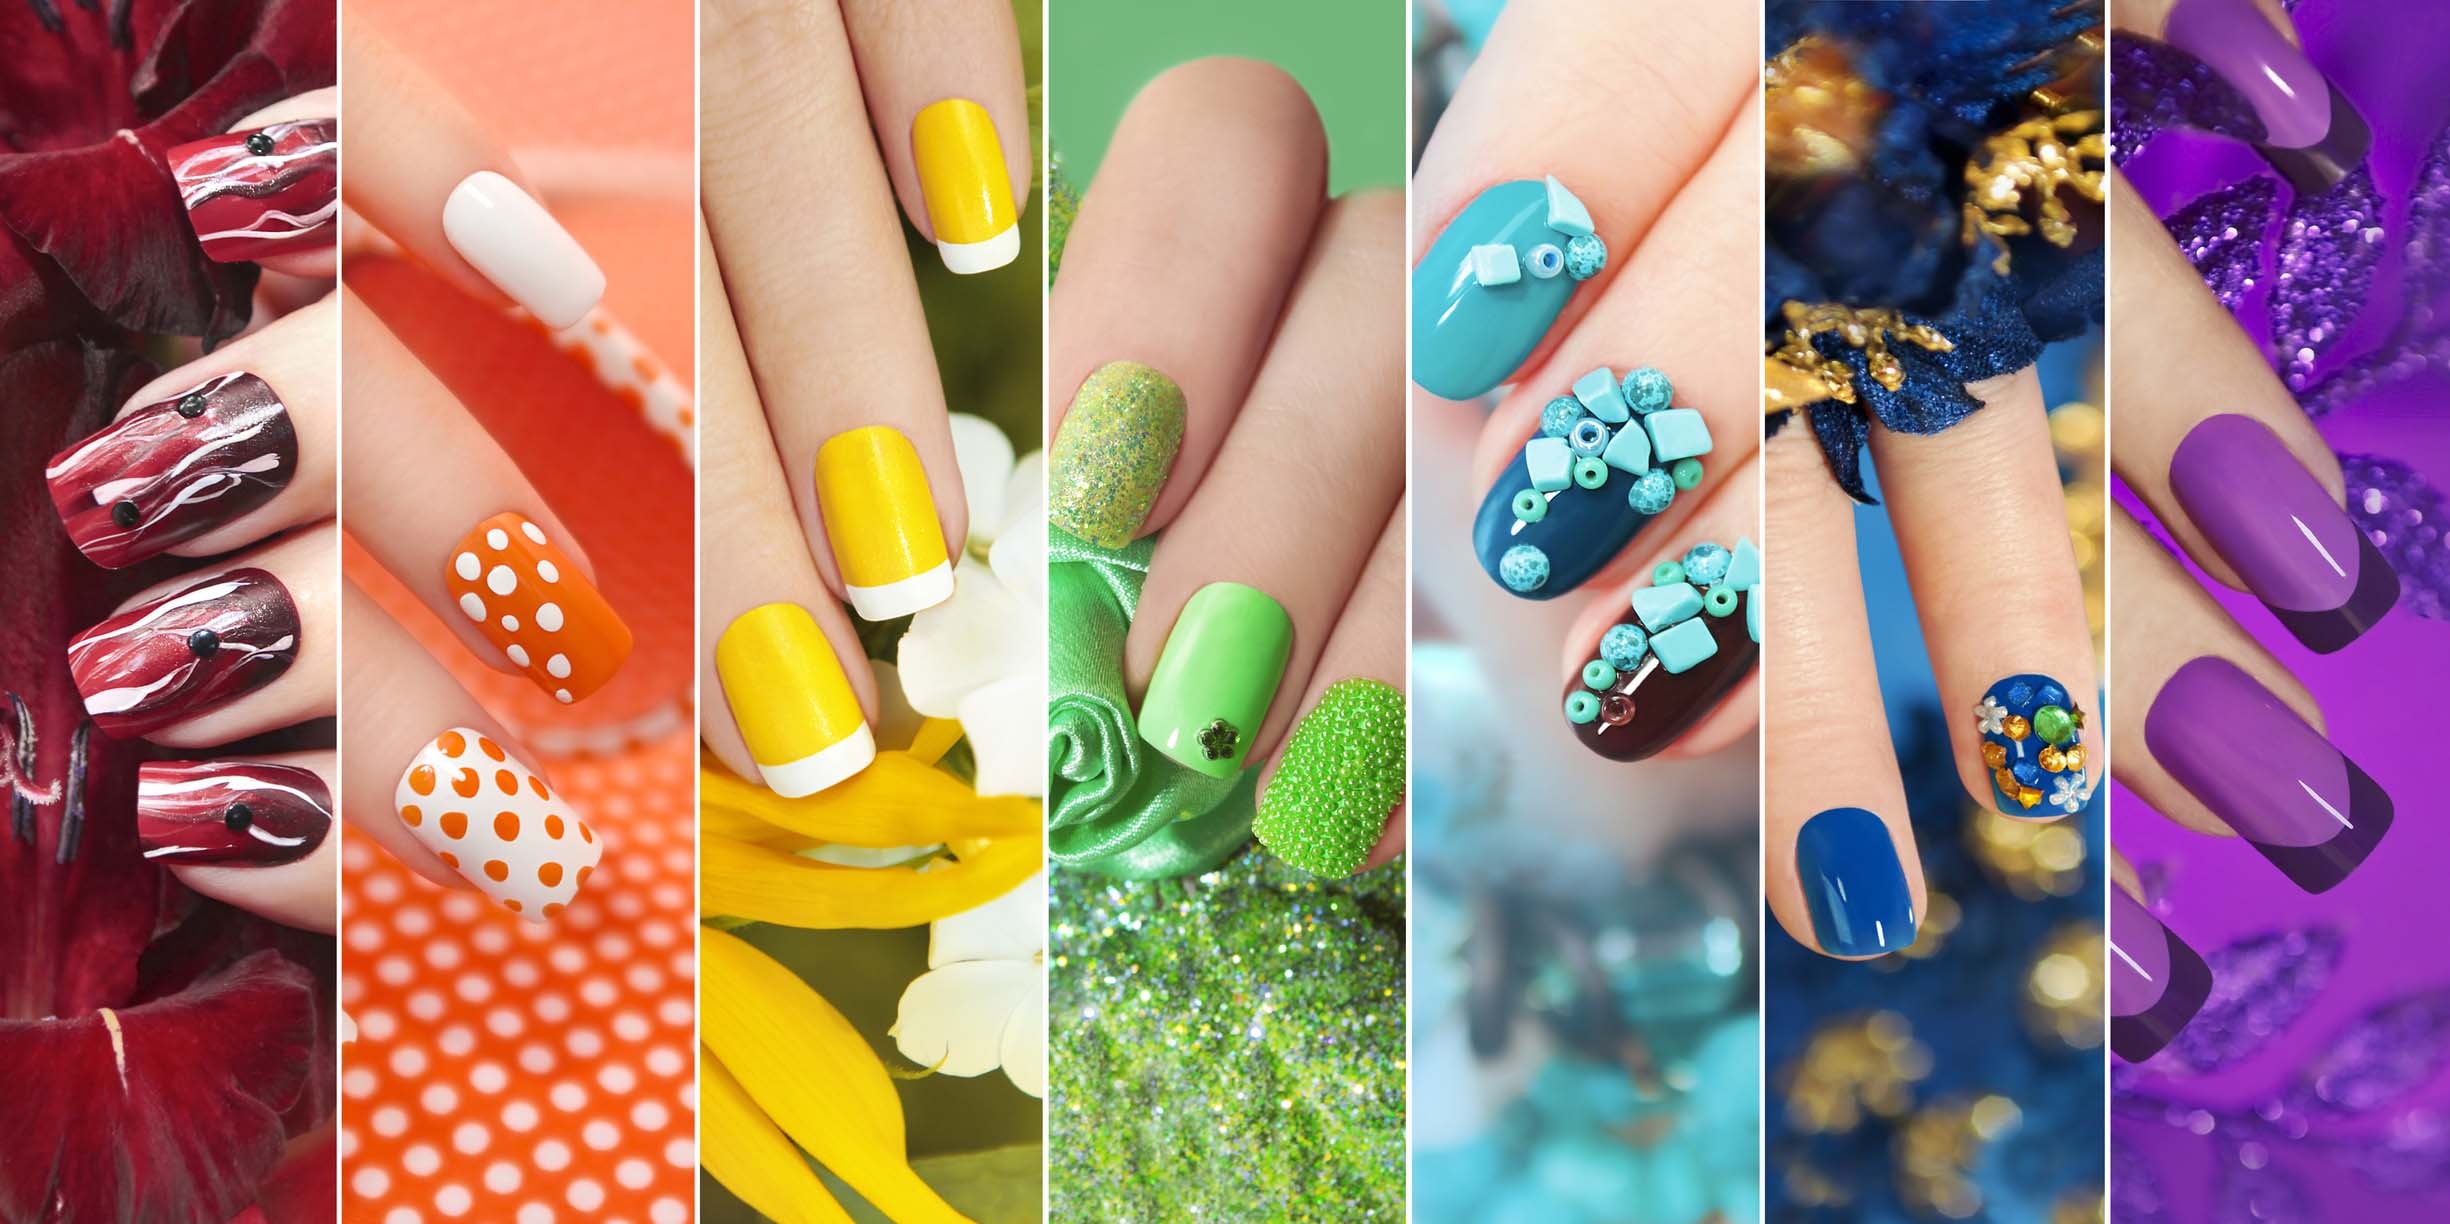 Three images of manicured nails in yellow, green and blue